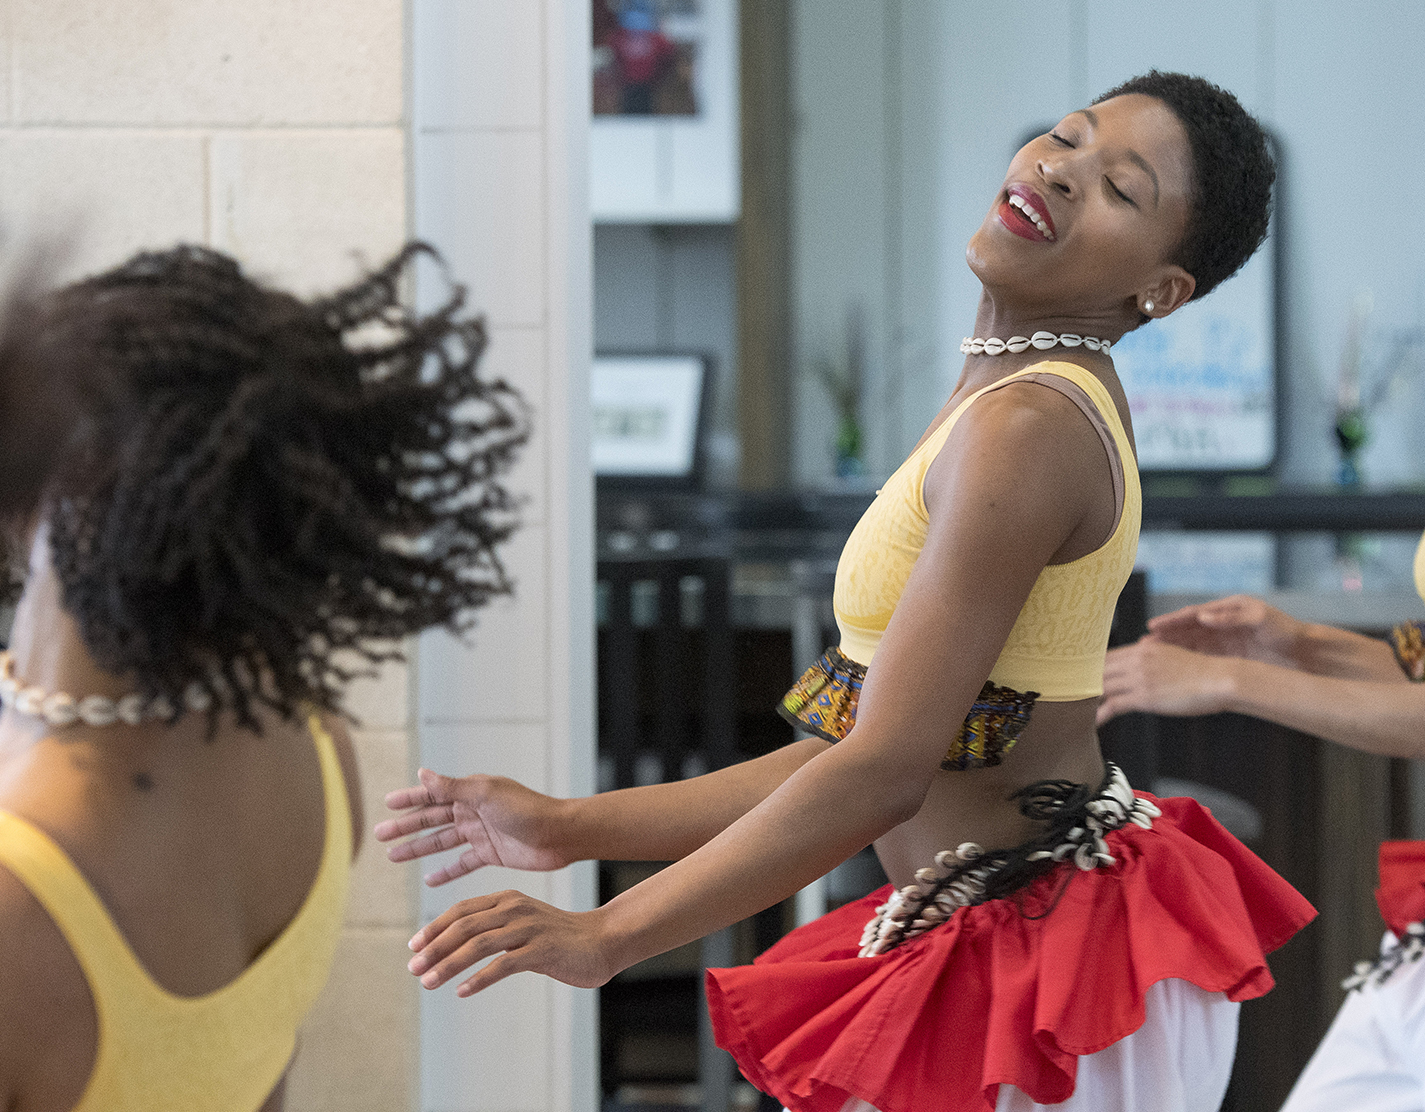 Dancer and choreographer Christen Williams introduced each performance and shared stories about the African-American culture and dances in and around Dallas.